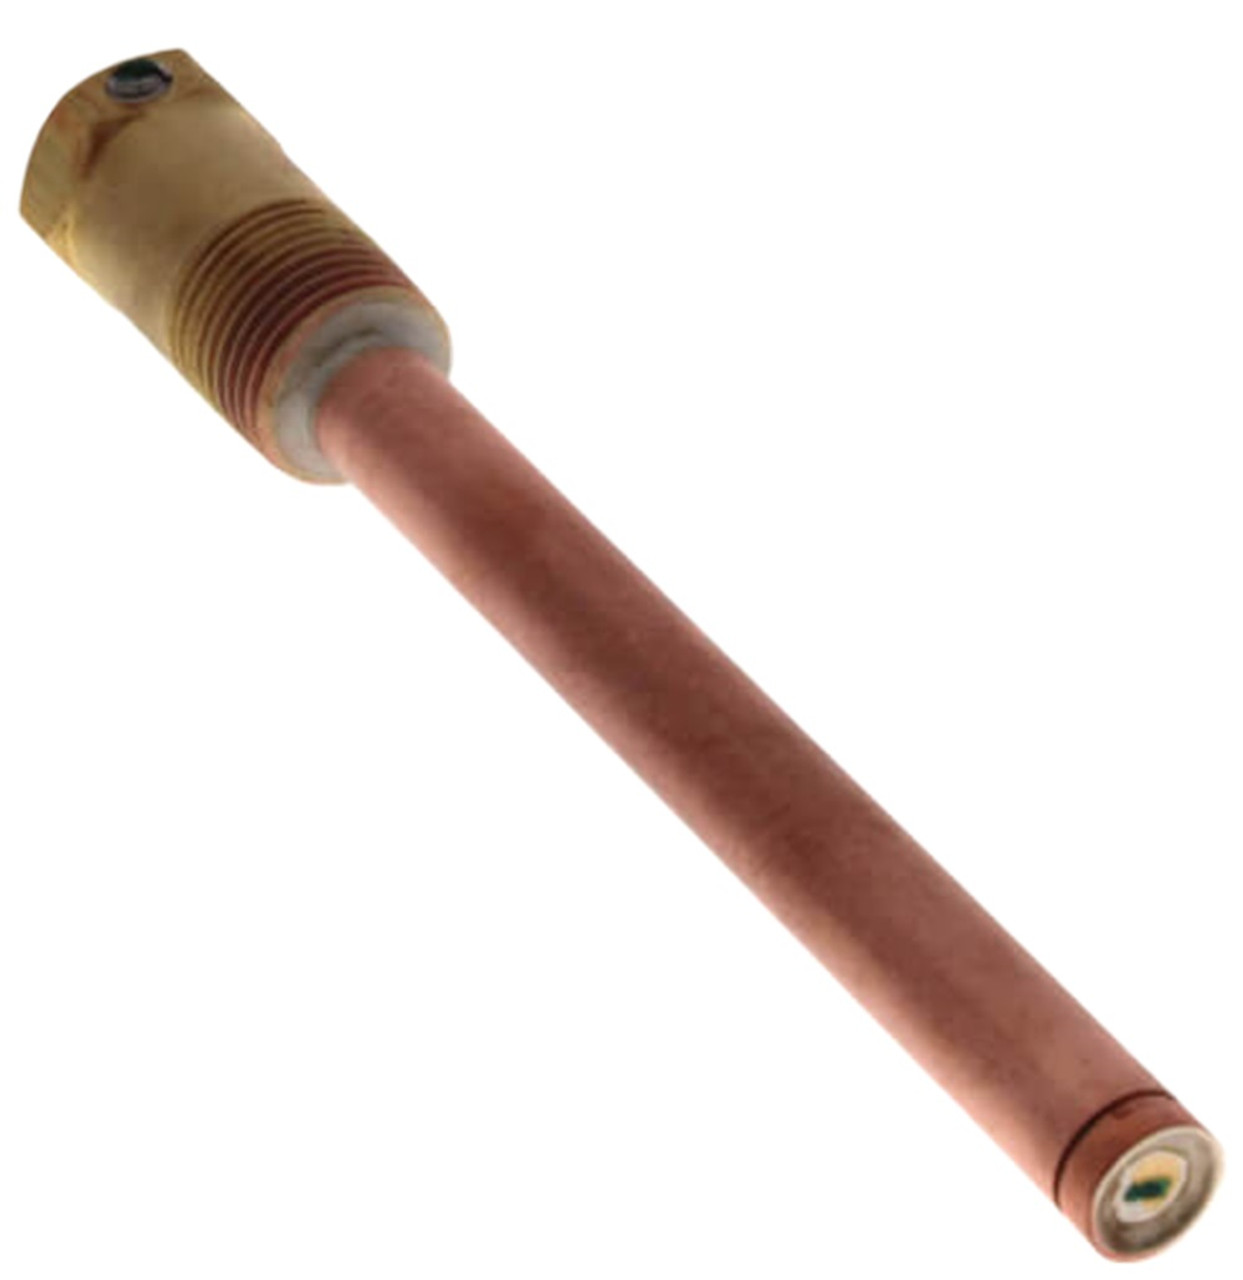 Johnson Controls WEL14A-602R Bulb Well, 1/2" Pipe Thread, Brass Connector [New]